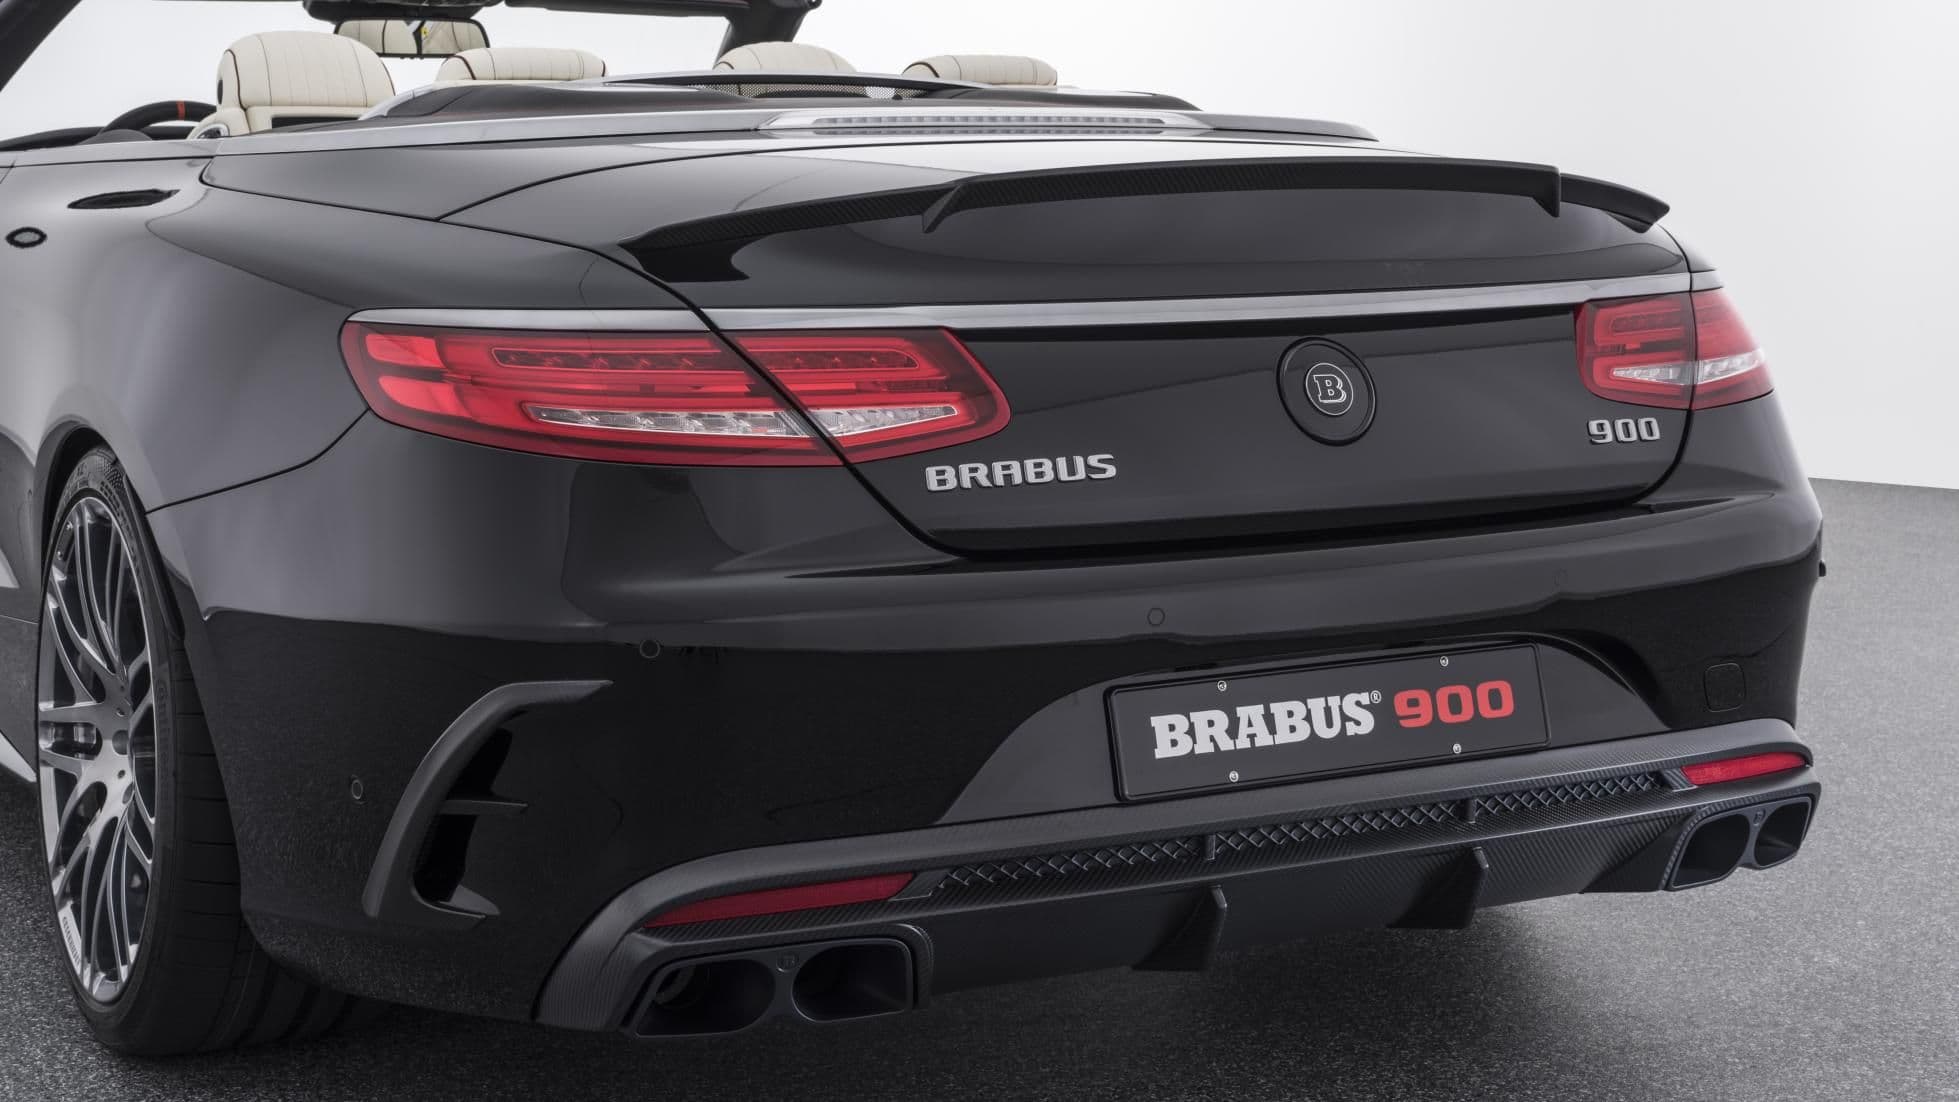 Brabus 900 Rocket based on the Mercedes-AMG S65 Cabrio